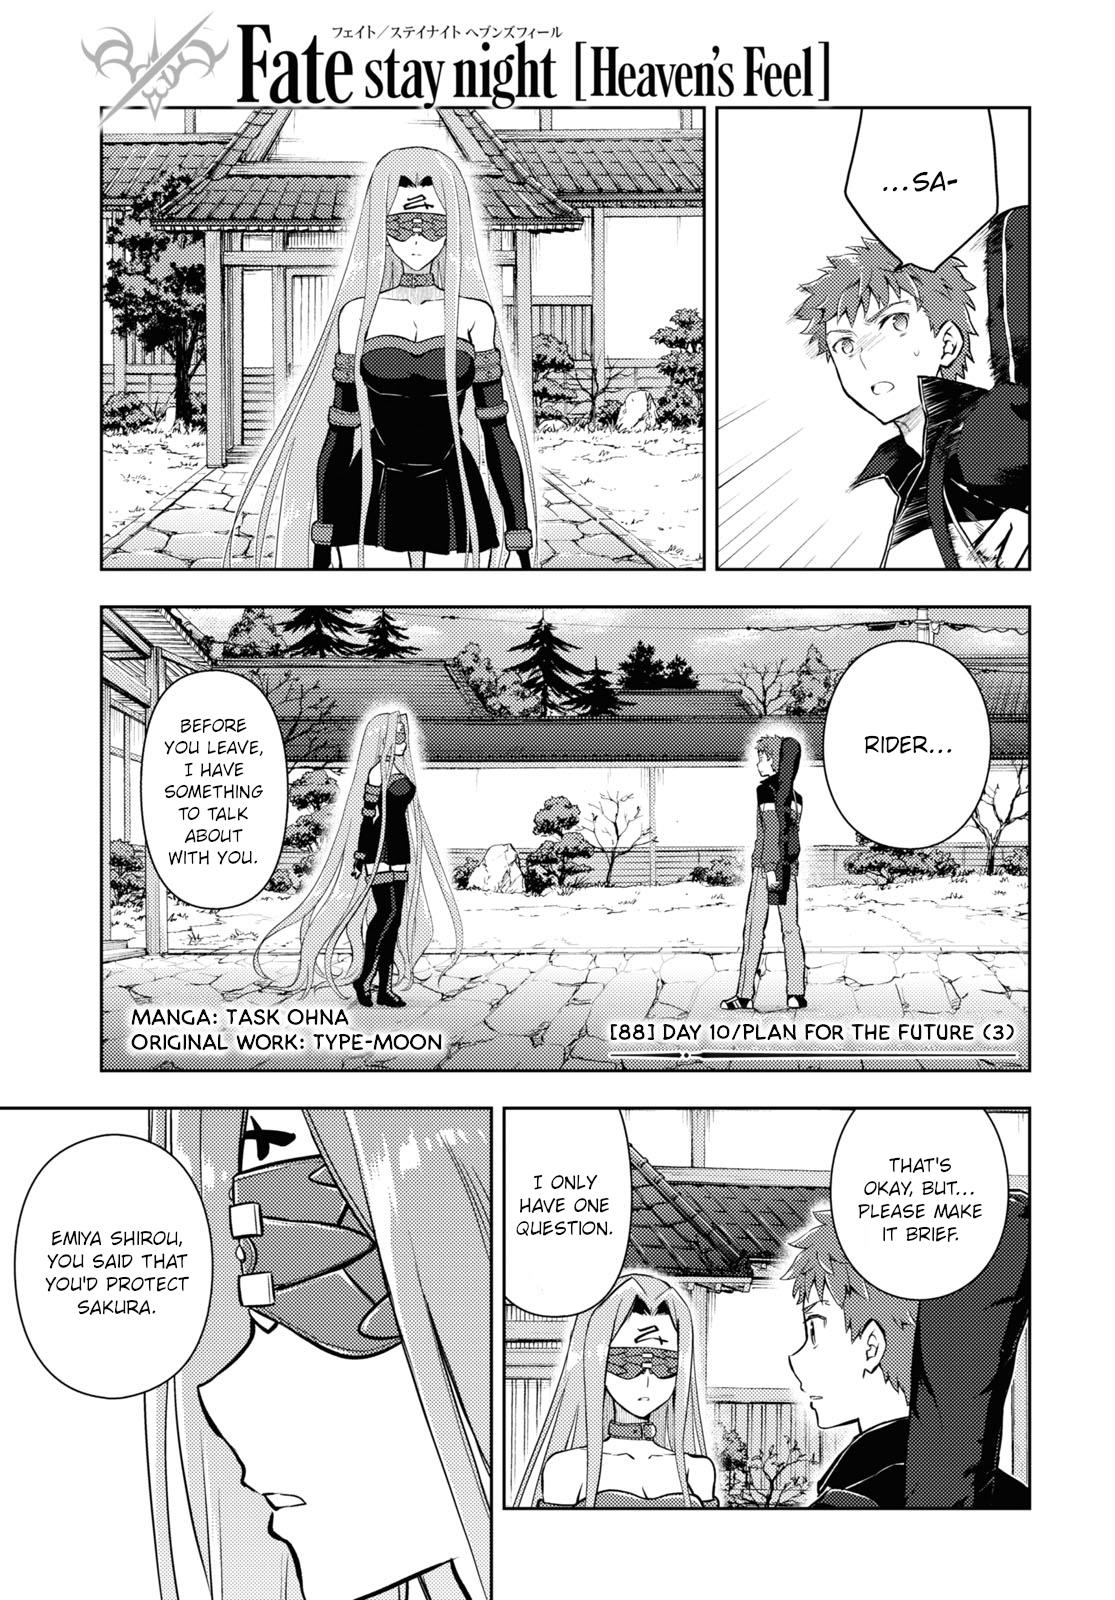 Fate/stay Night - Heaven's Feel - Page 1